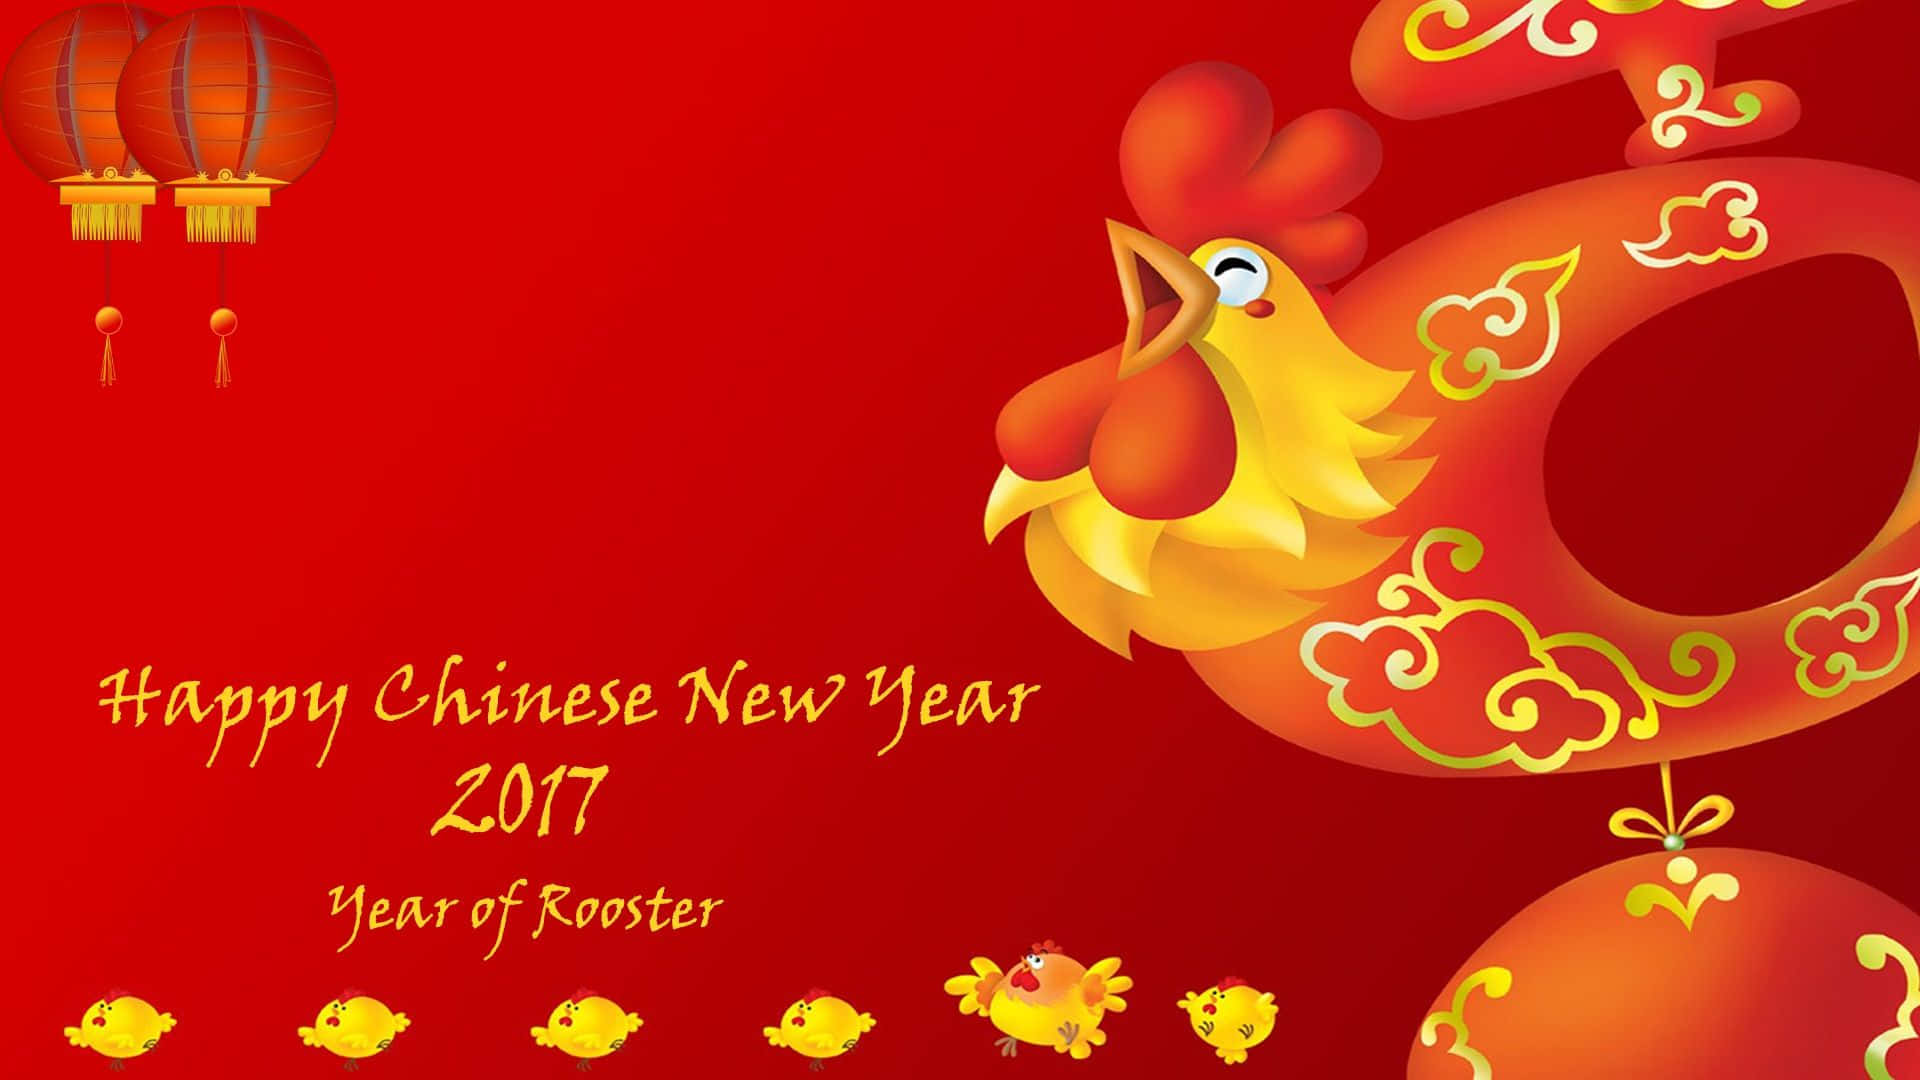 Welcome the Year of the Rat!